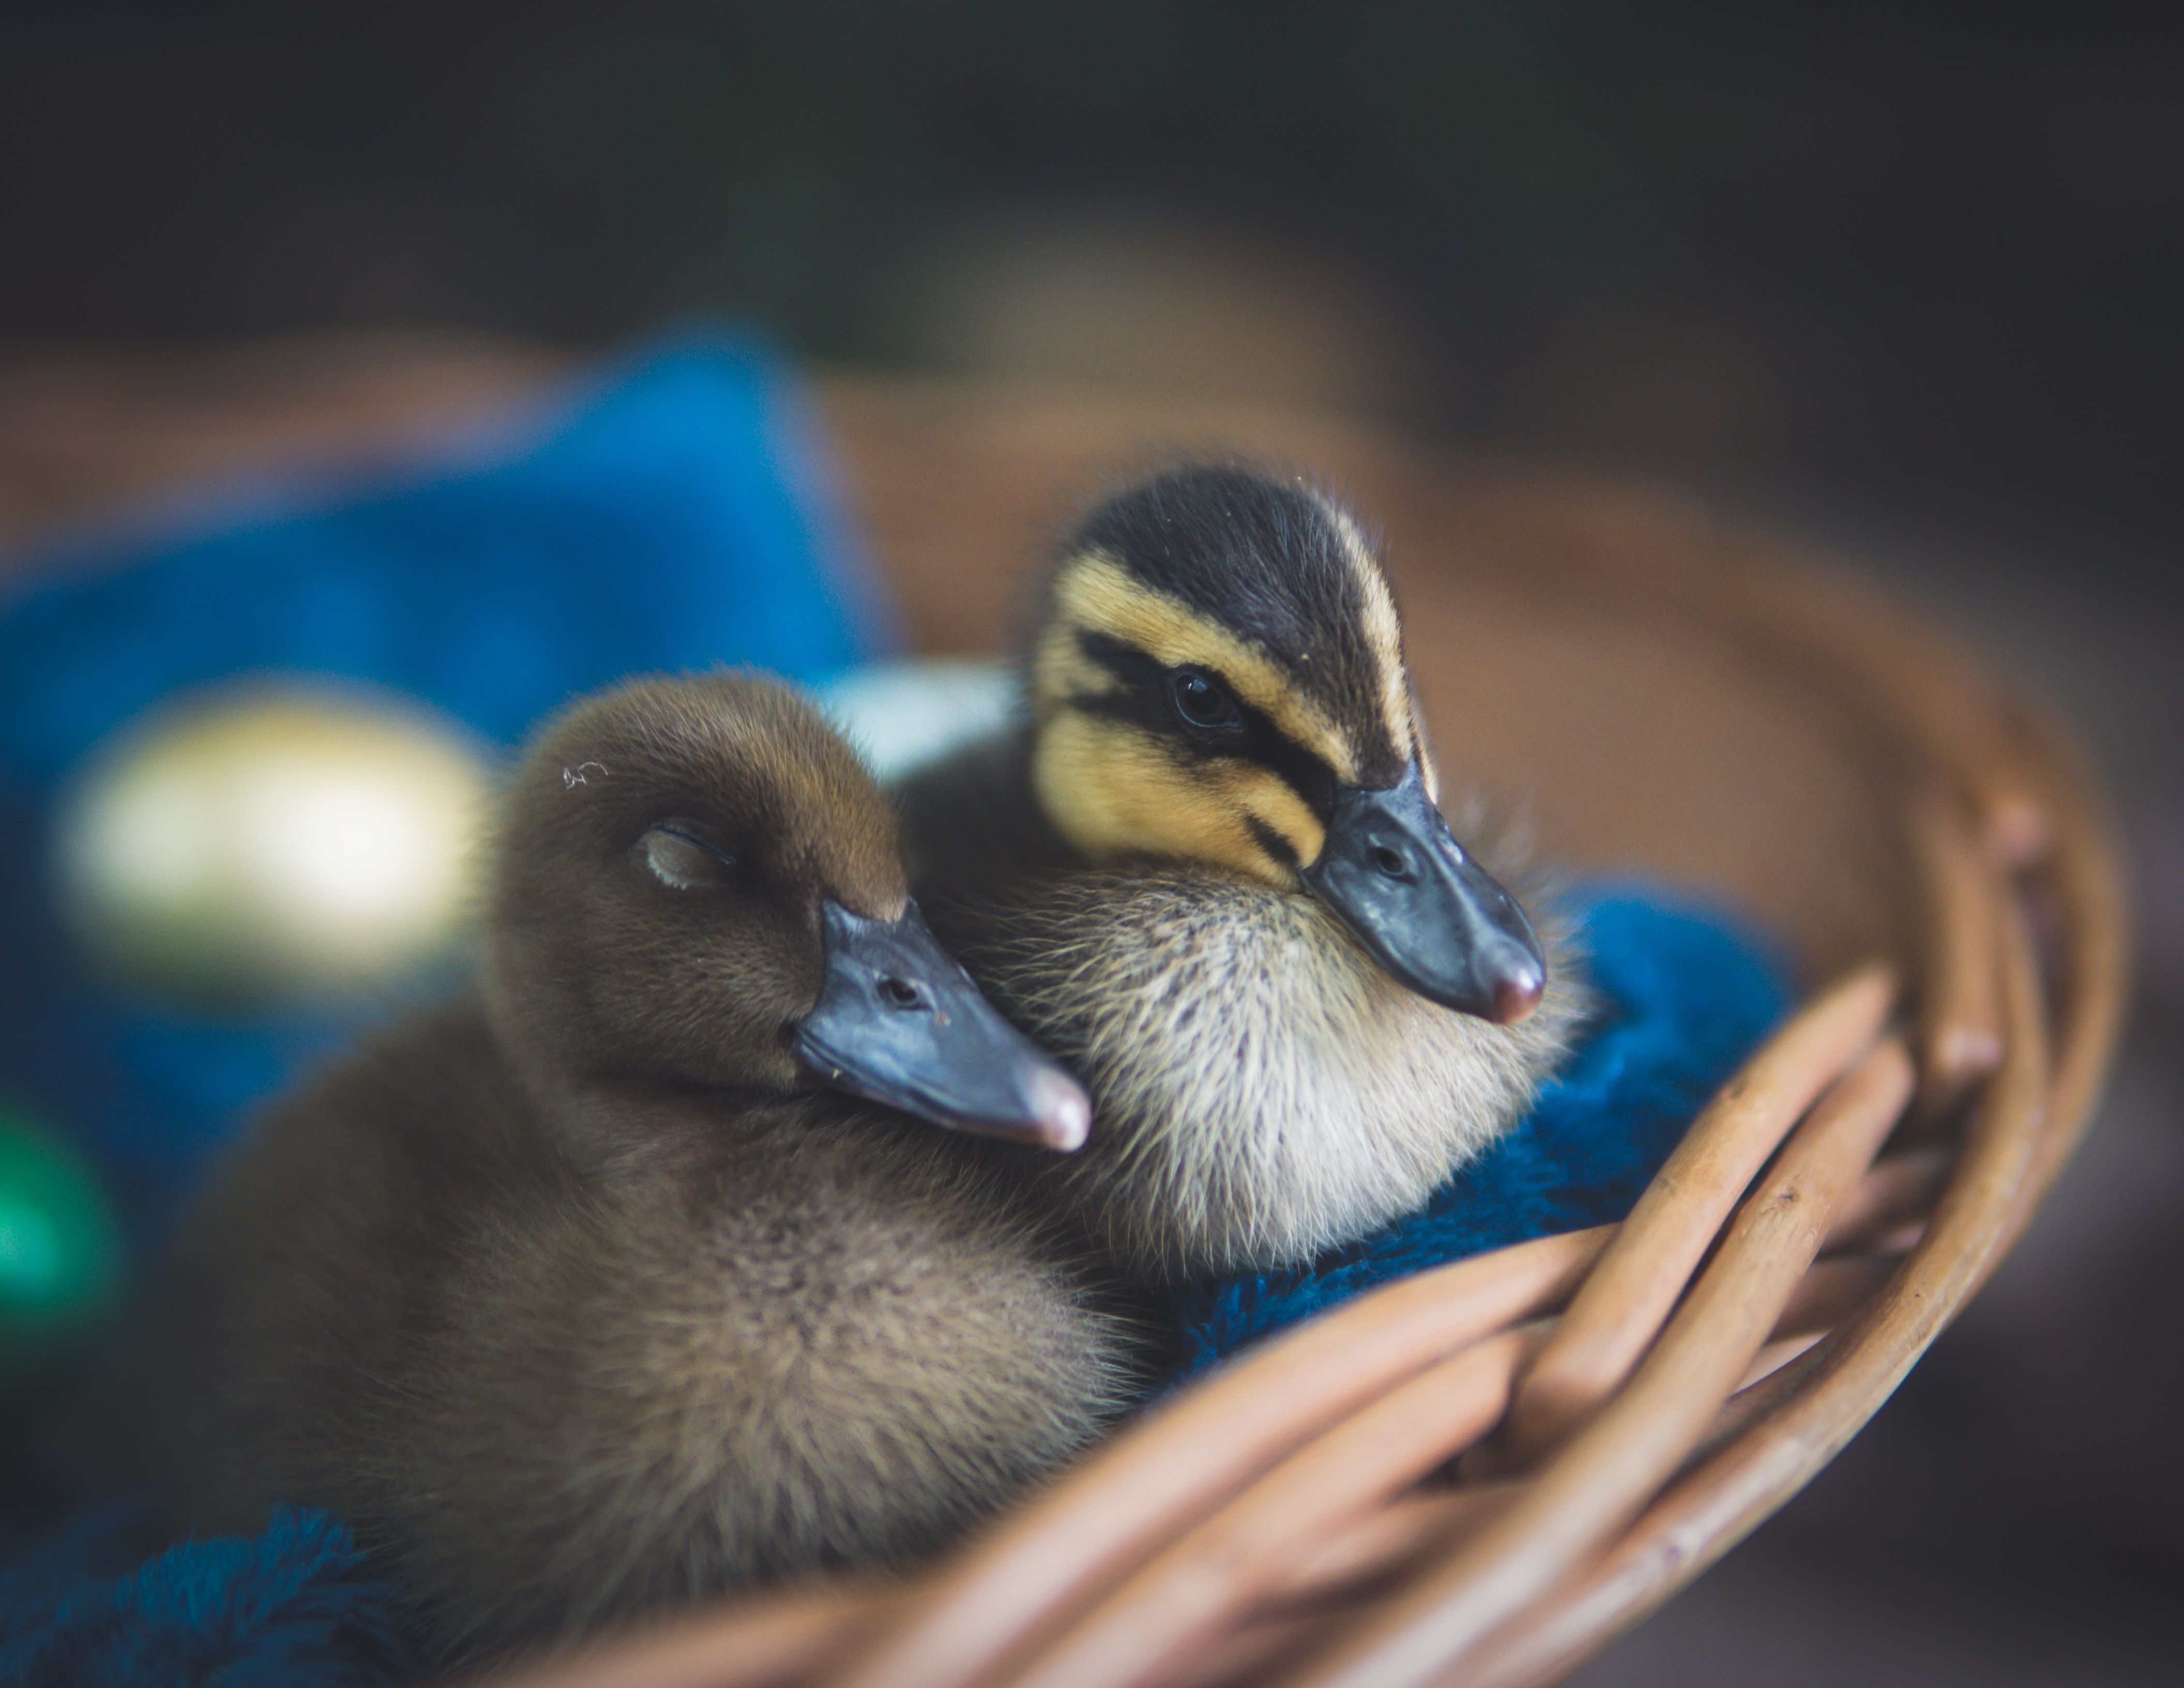 A couple of ducks sitting in the basket - Duck